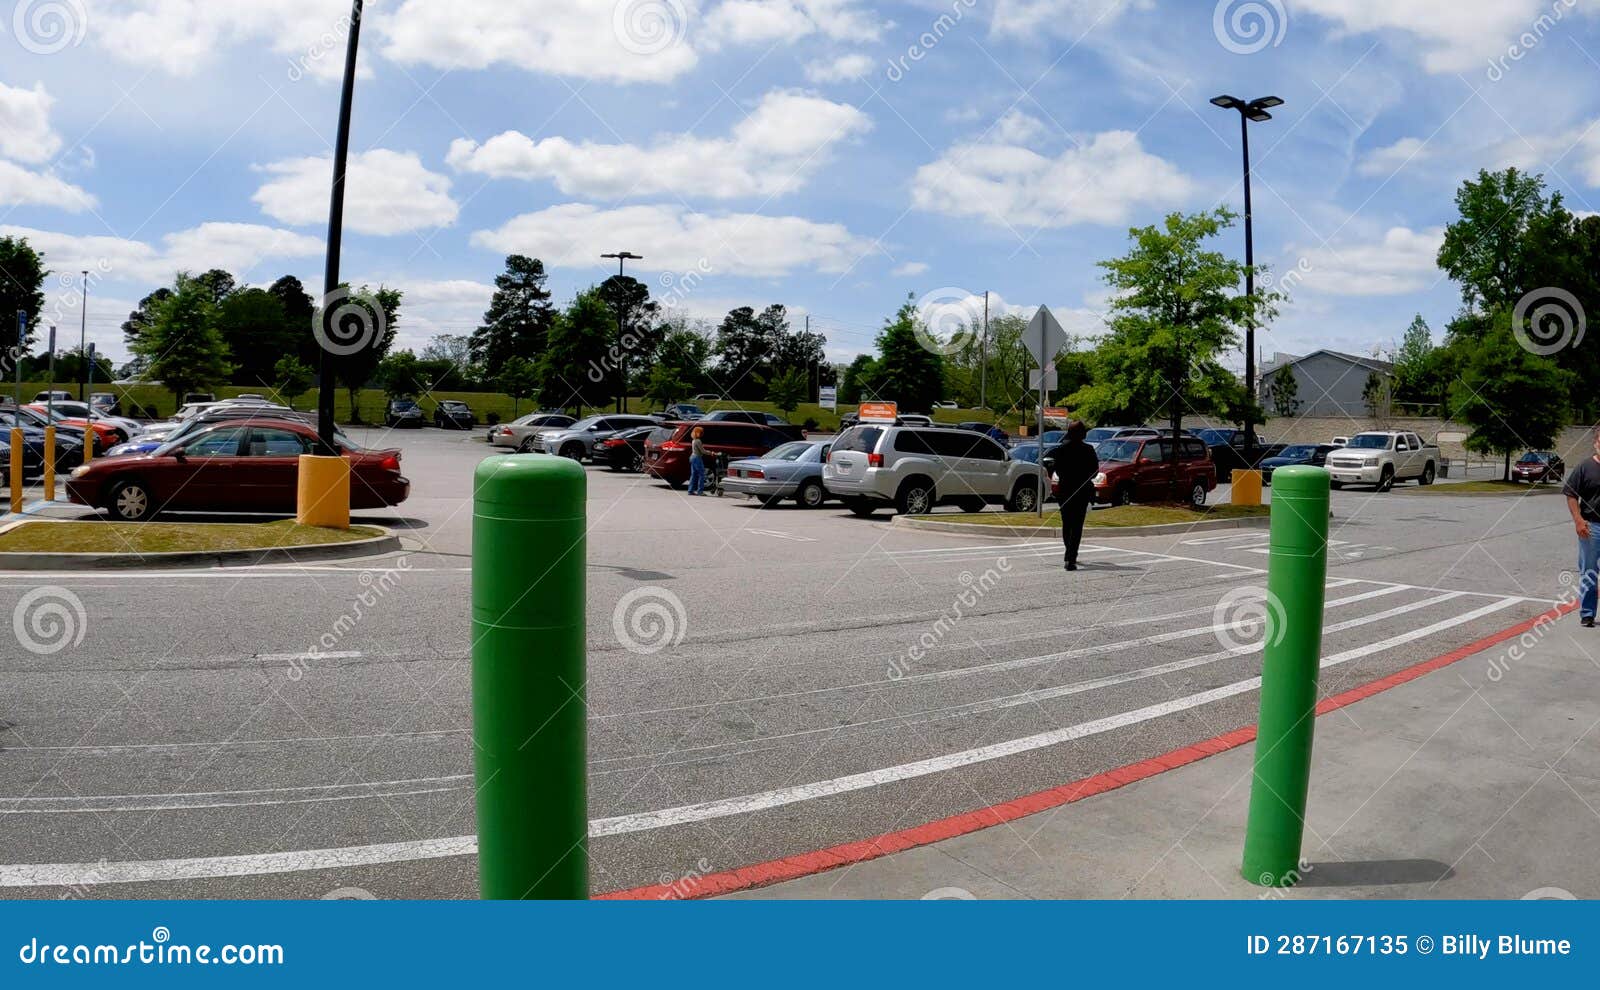 Walmart Grocery Store Exterior Green Poles Outside Editorial Image - Image  of check, meat: 287167135